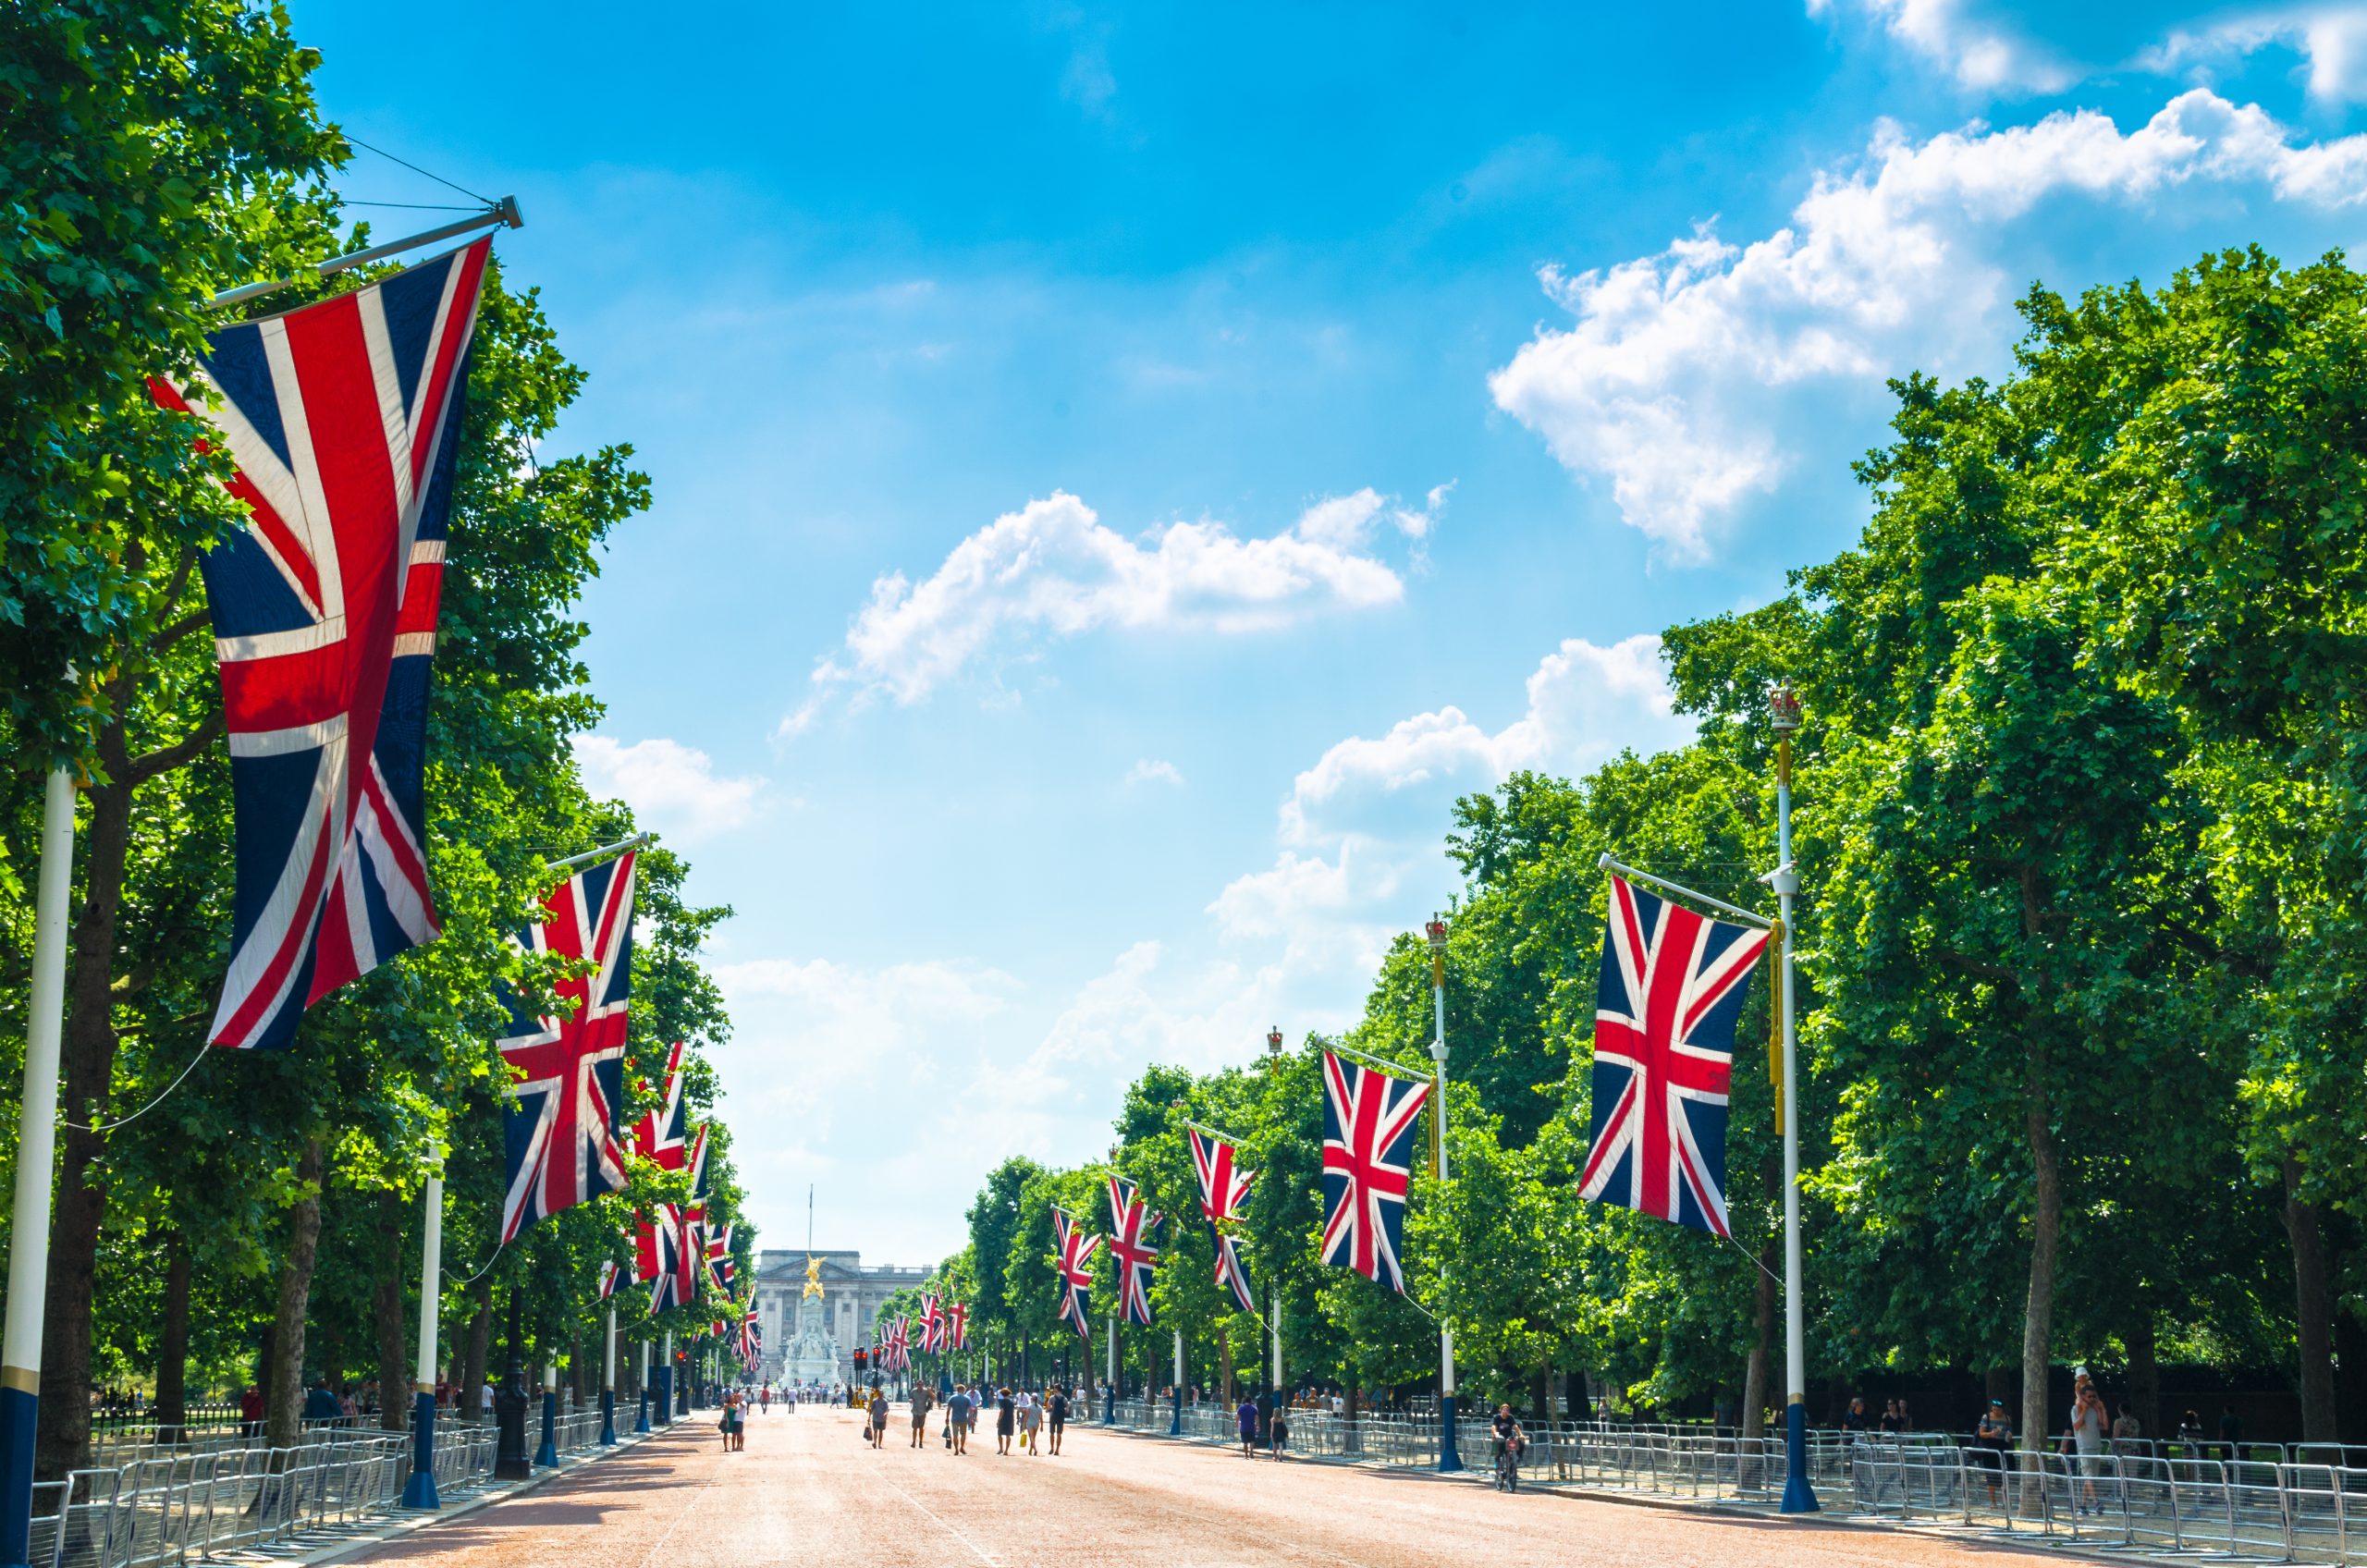 A photo of The Mall in London, adorned with British flags.